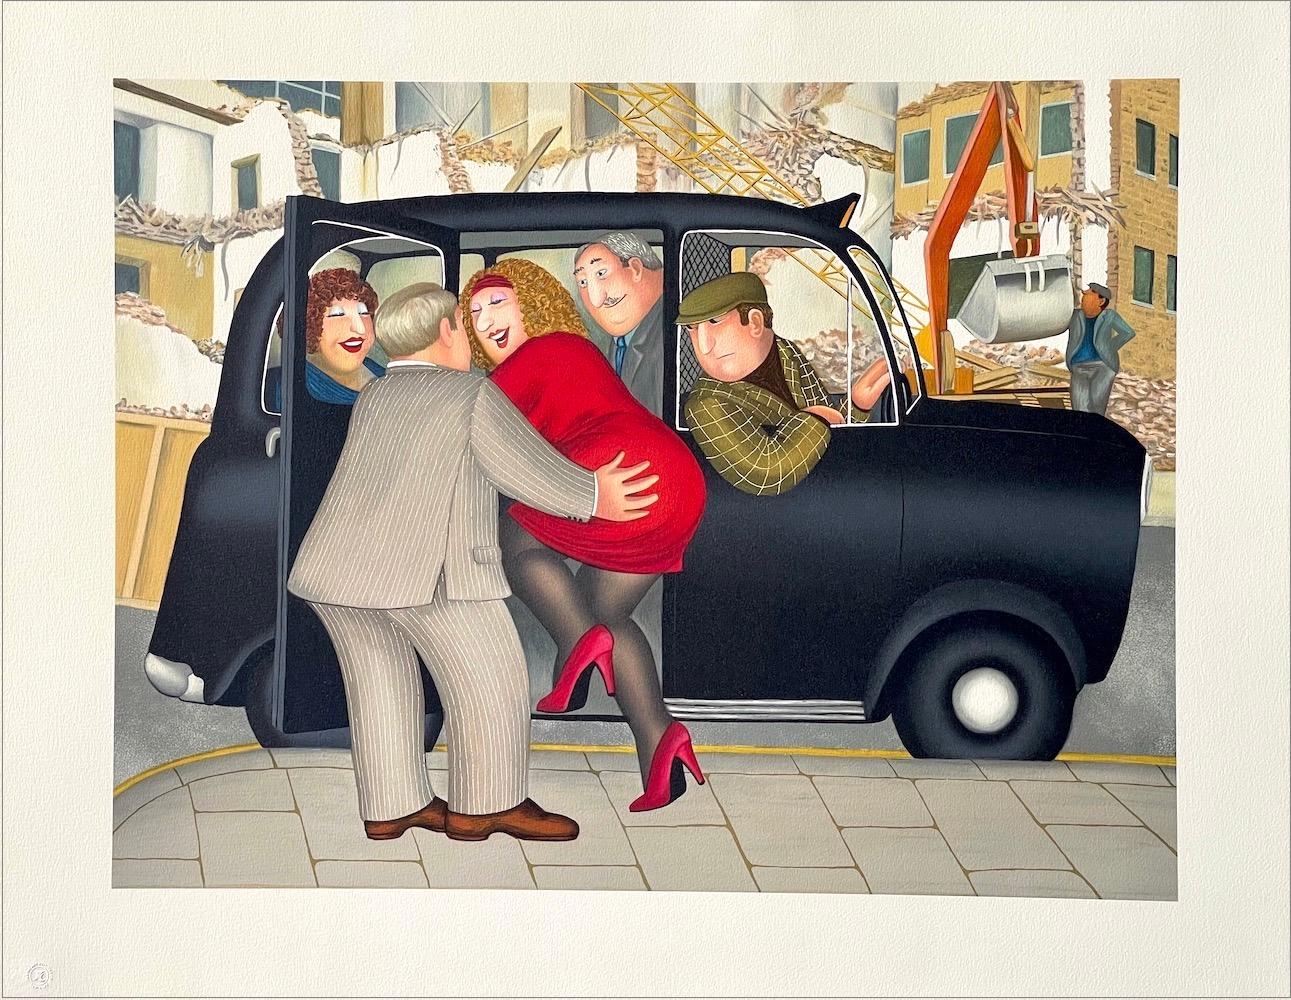 TAXI Hand Drawn Lithograph, Lady in Red, London Black Cab, British Humor